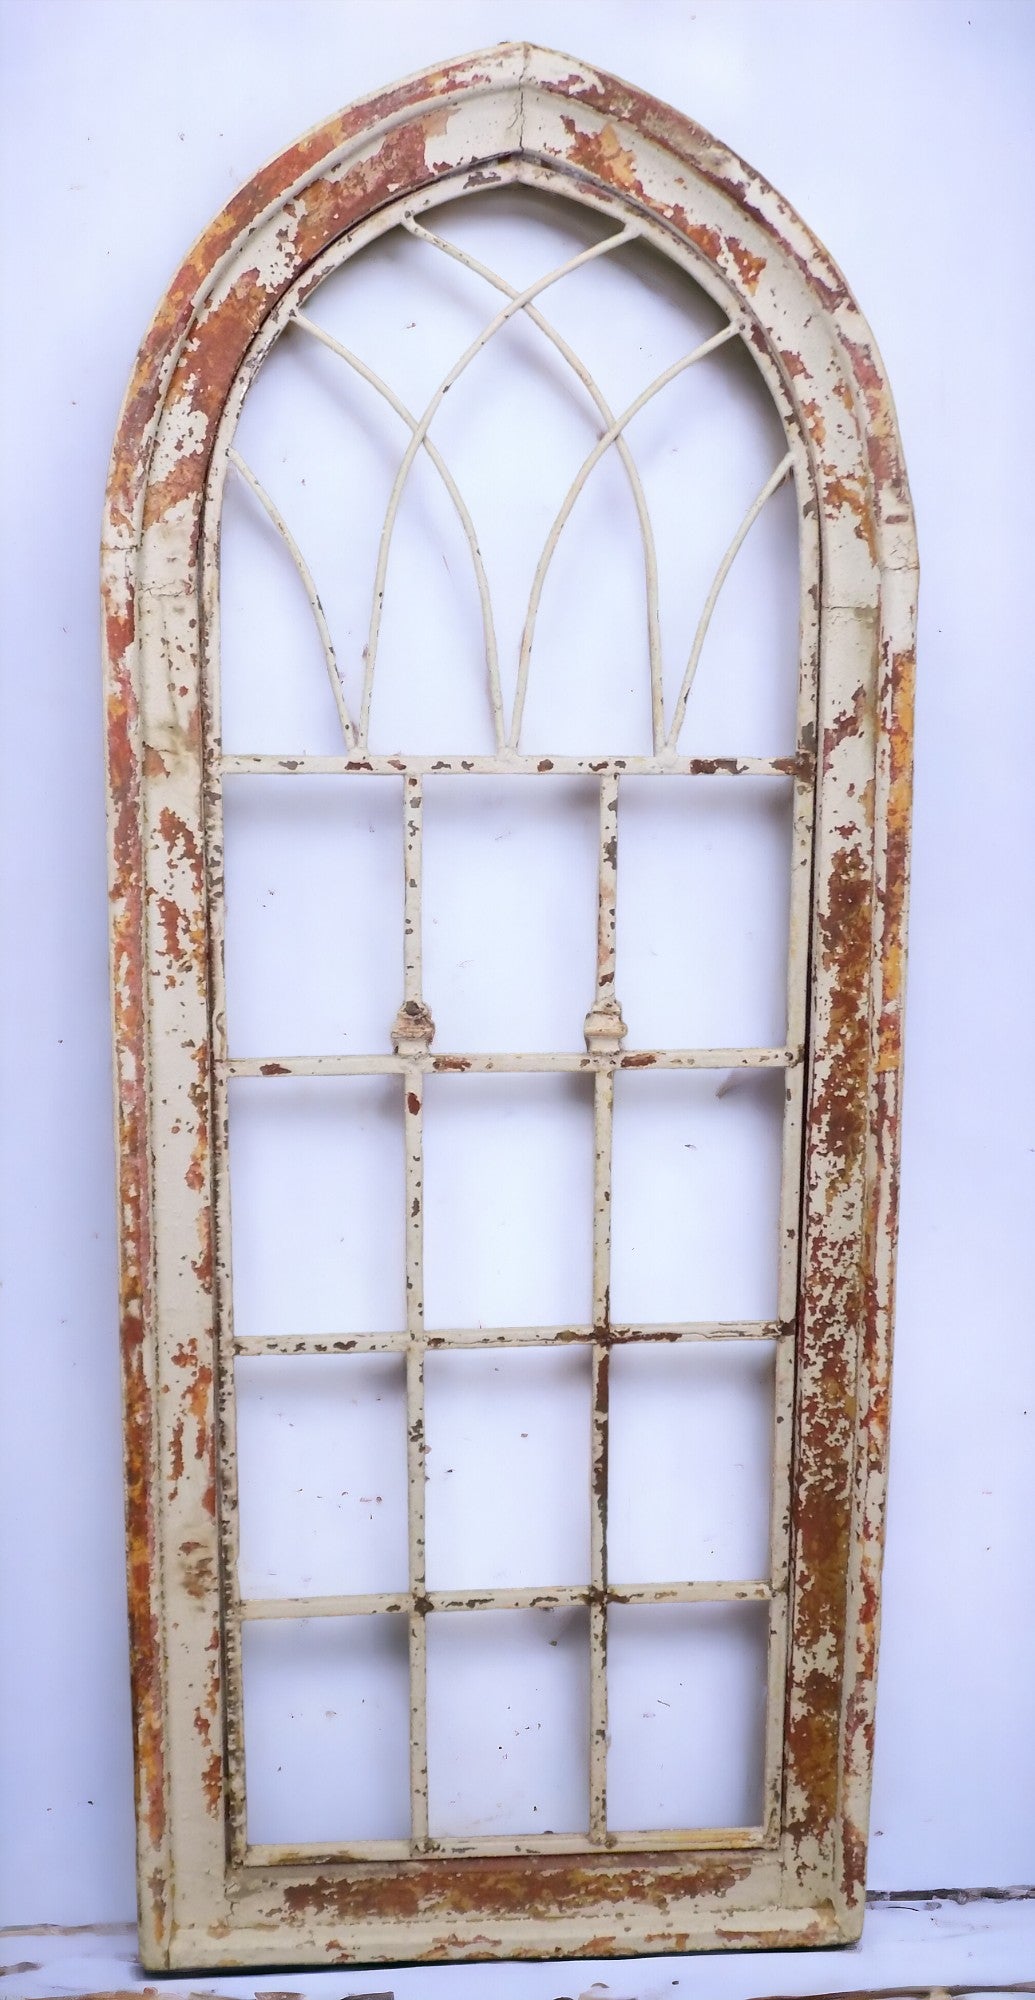 Wood Metal Architectural Window Wall Decor Arched Cathedral Church Window Frame